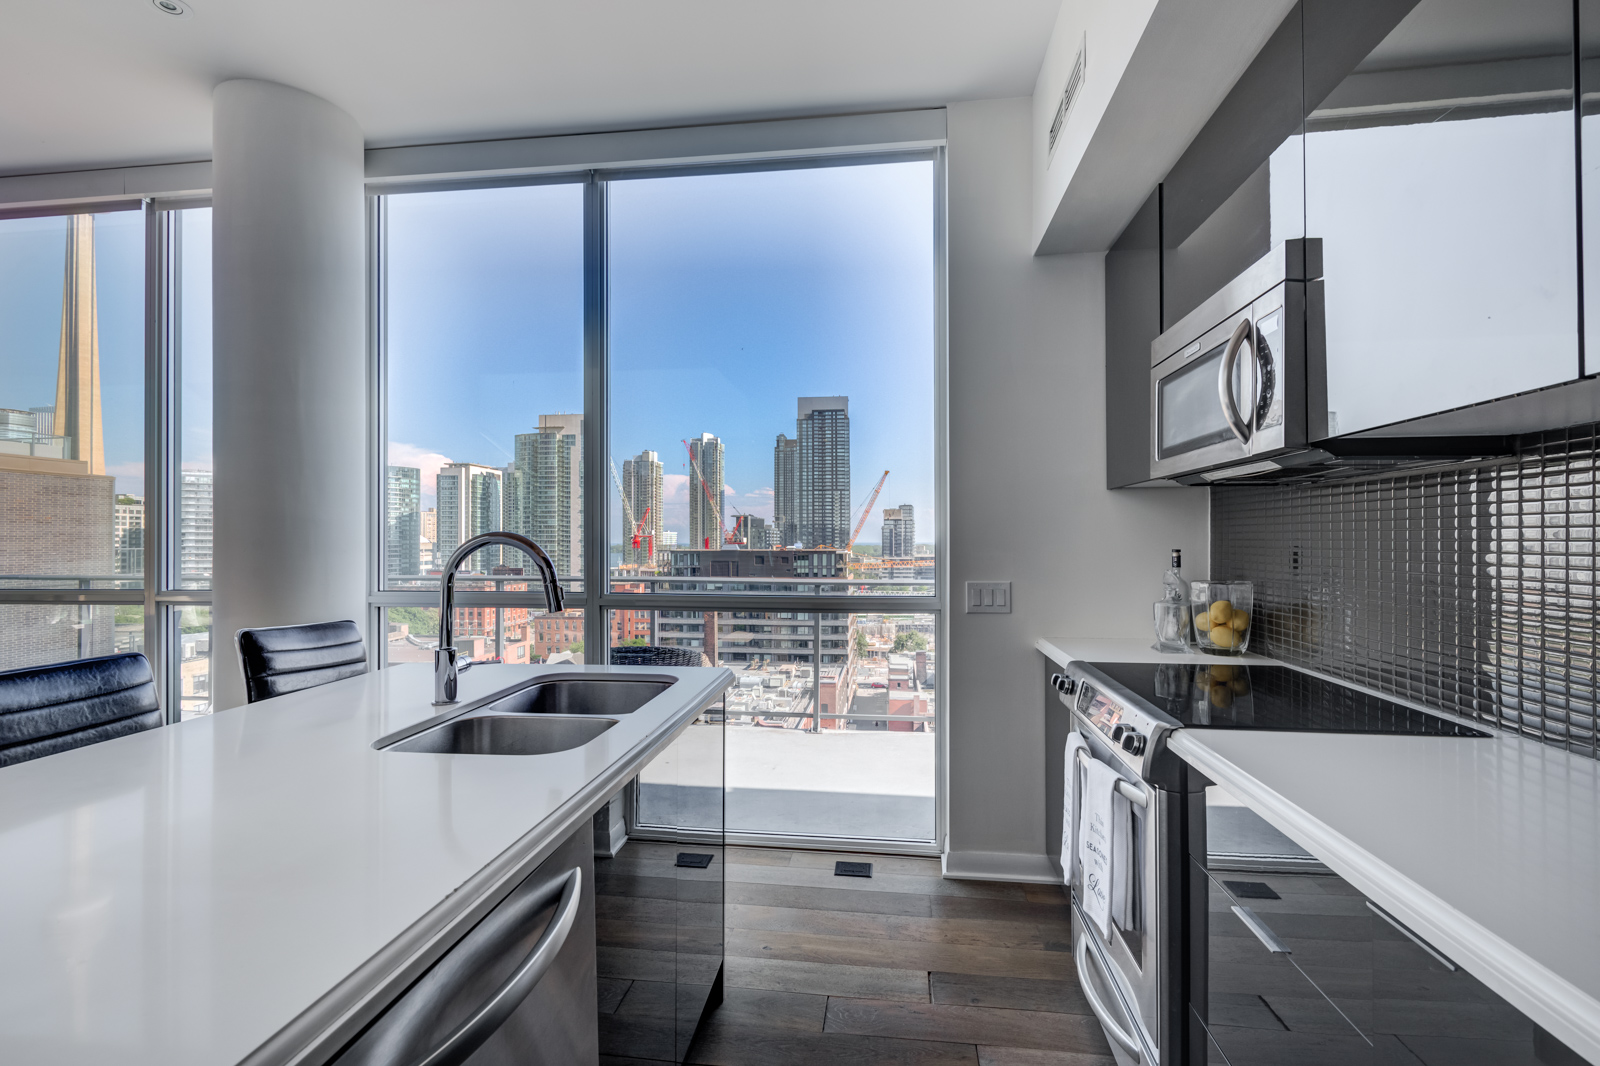 View of Toronto from kitchen windows of Victory Lofts Penthouse Suite in 478 King St.